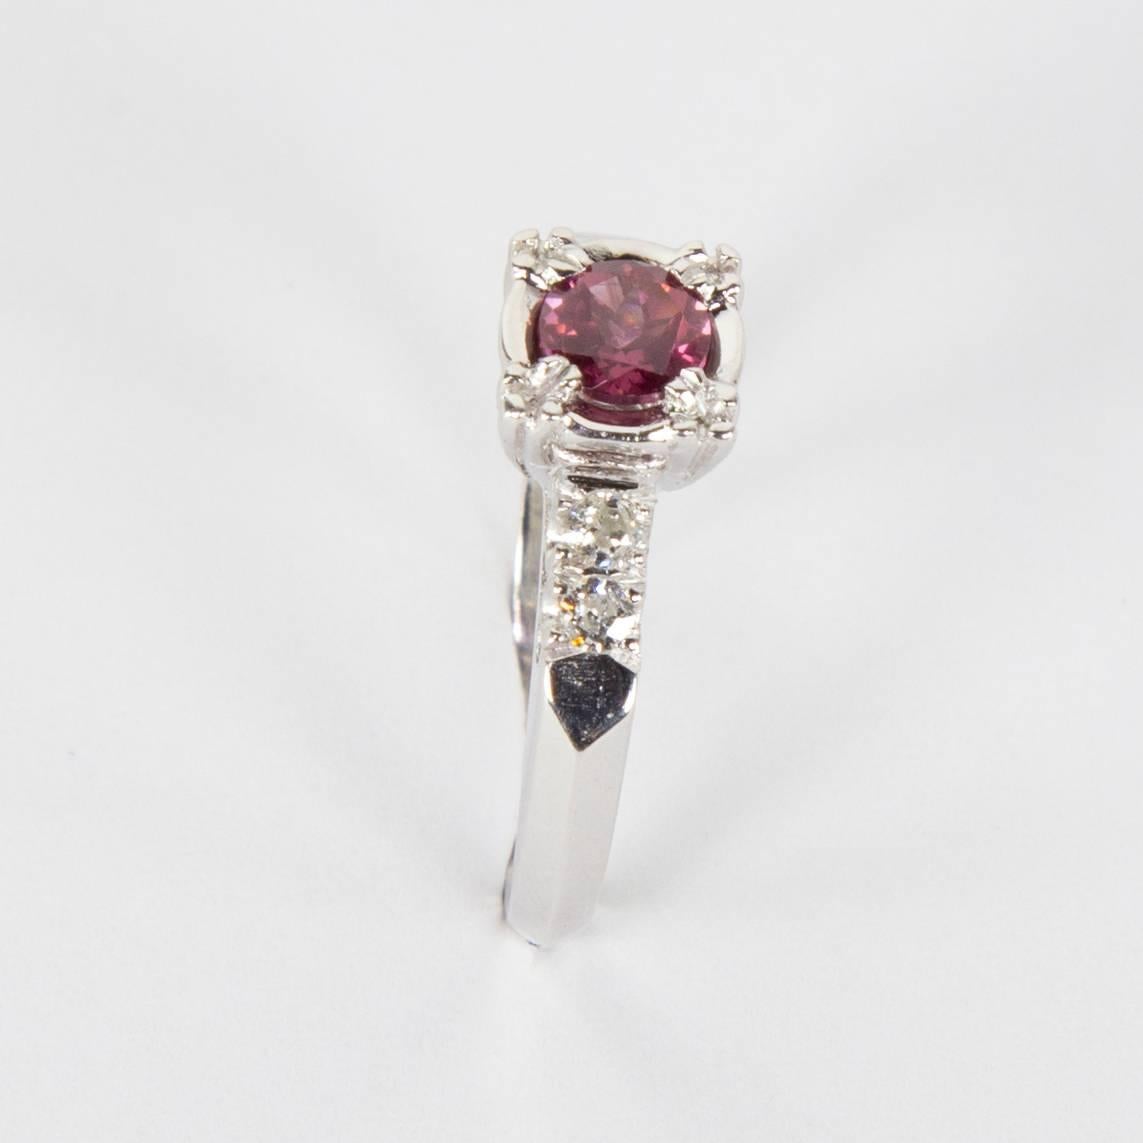 Beautiful Solitaire Engagement Ring centering a Pink Tourmaline, approx. 0.45 carat; enhanced with Diamonds on shoulders of Platinum mounting. Marked: PLAT; Ring size: 6.5; Complimentary ring resizing available. A Special and Timeless engagement